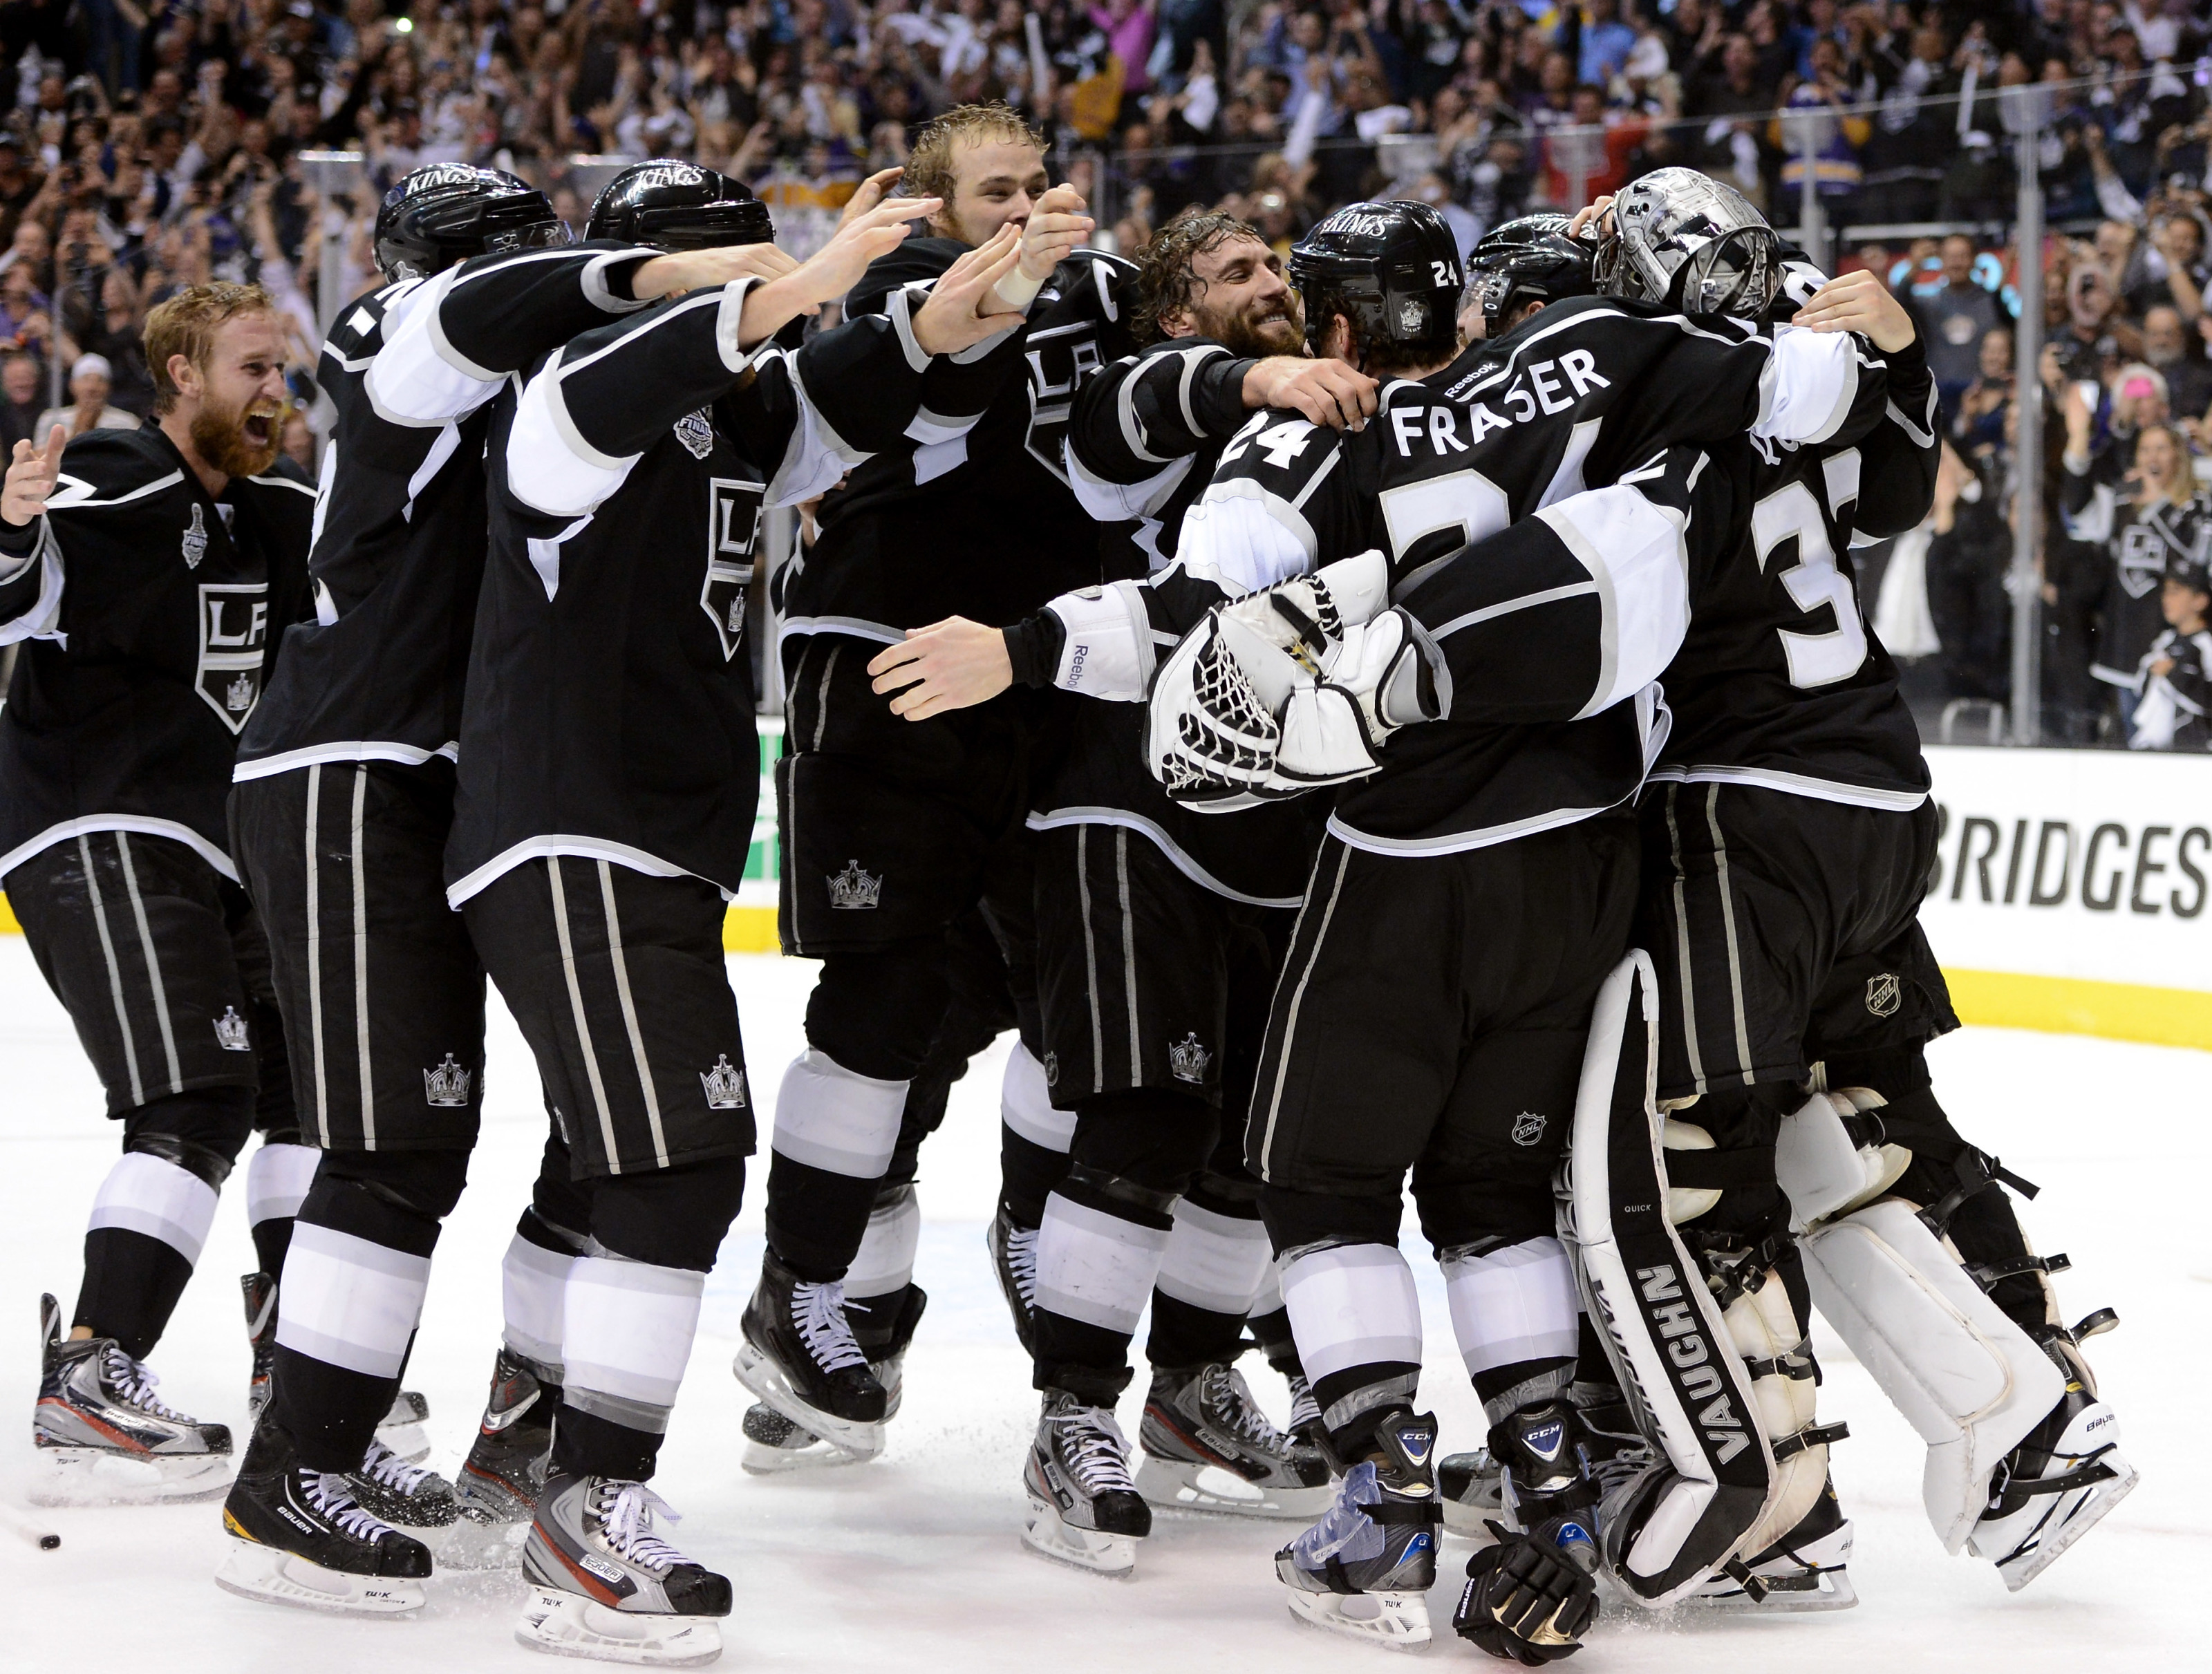 Los Angeles Kings are one win away from the NHL Stanley Cup